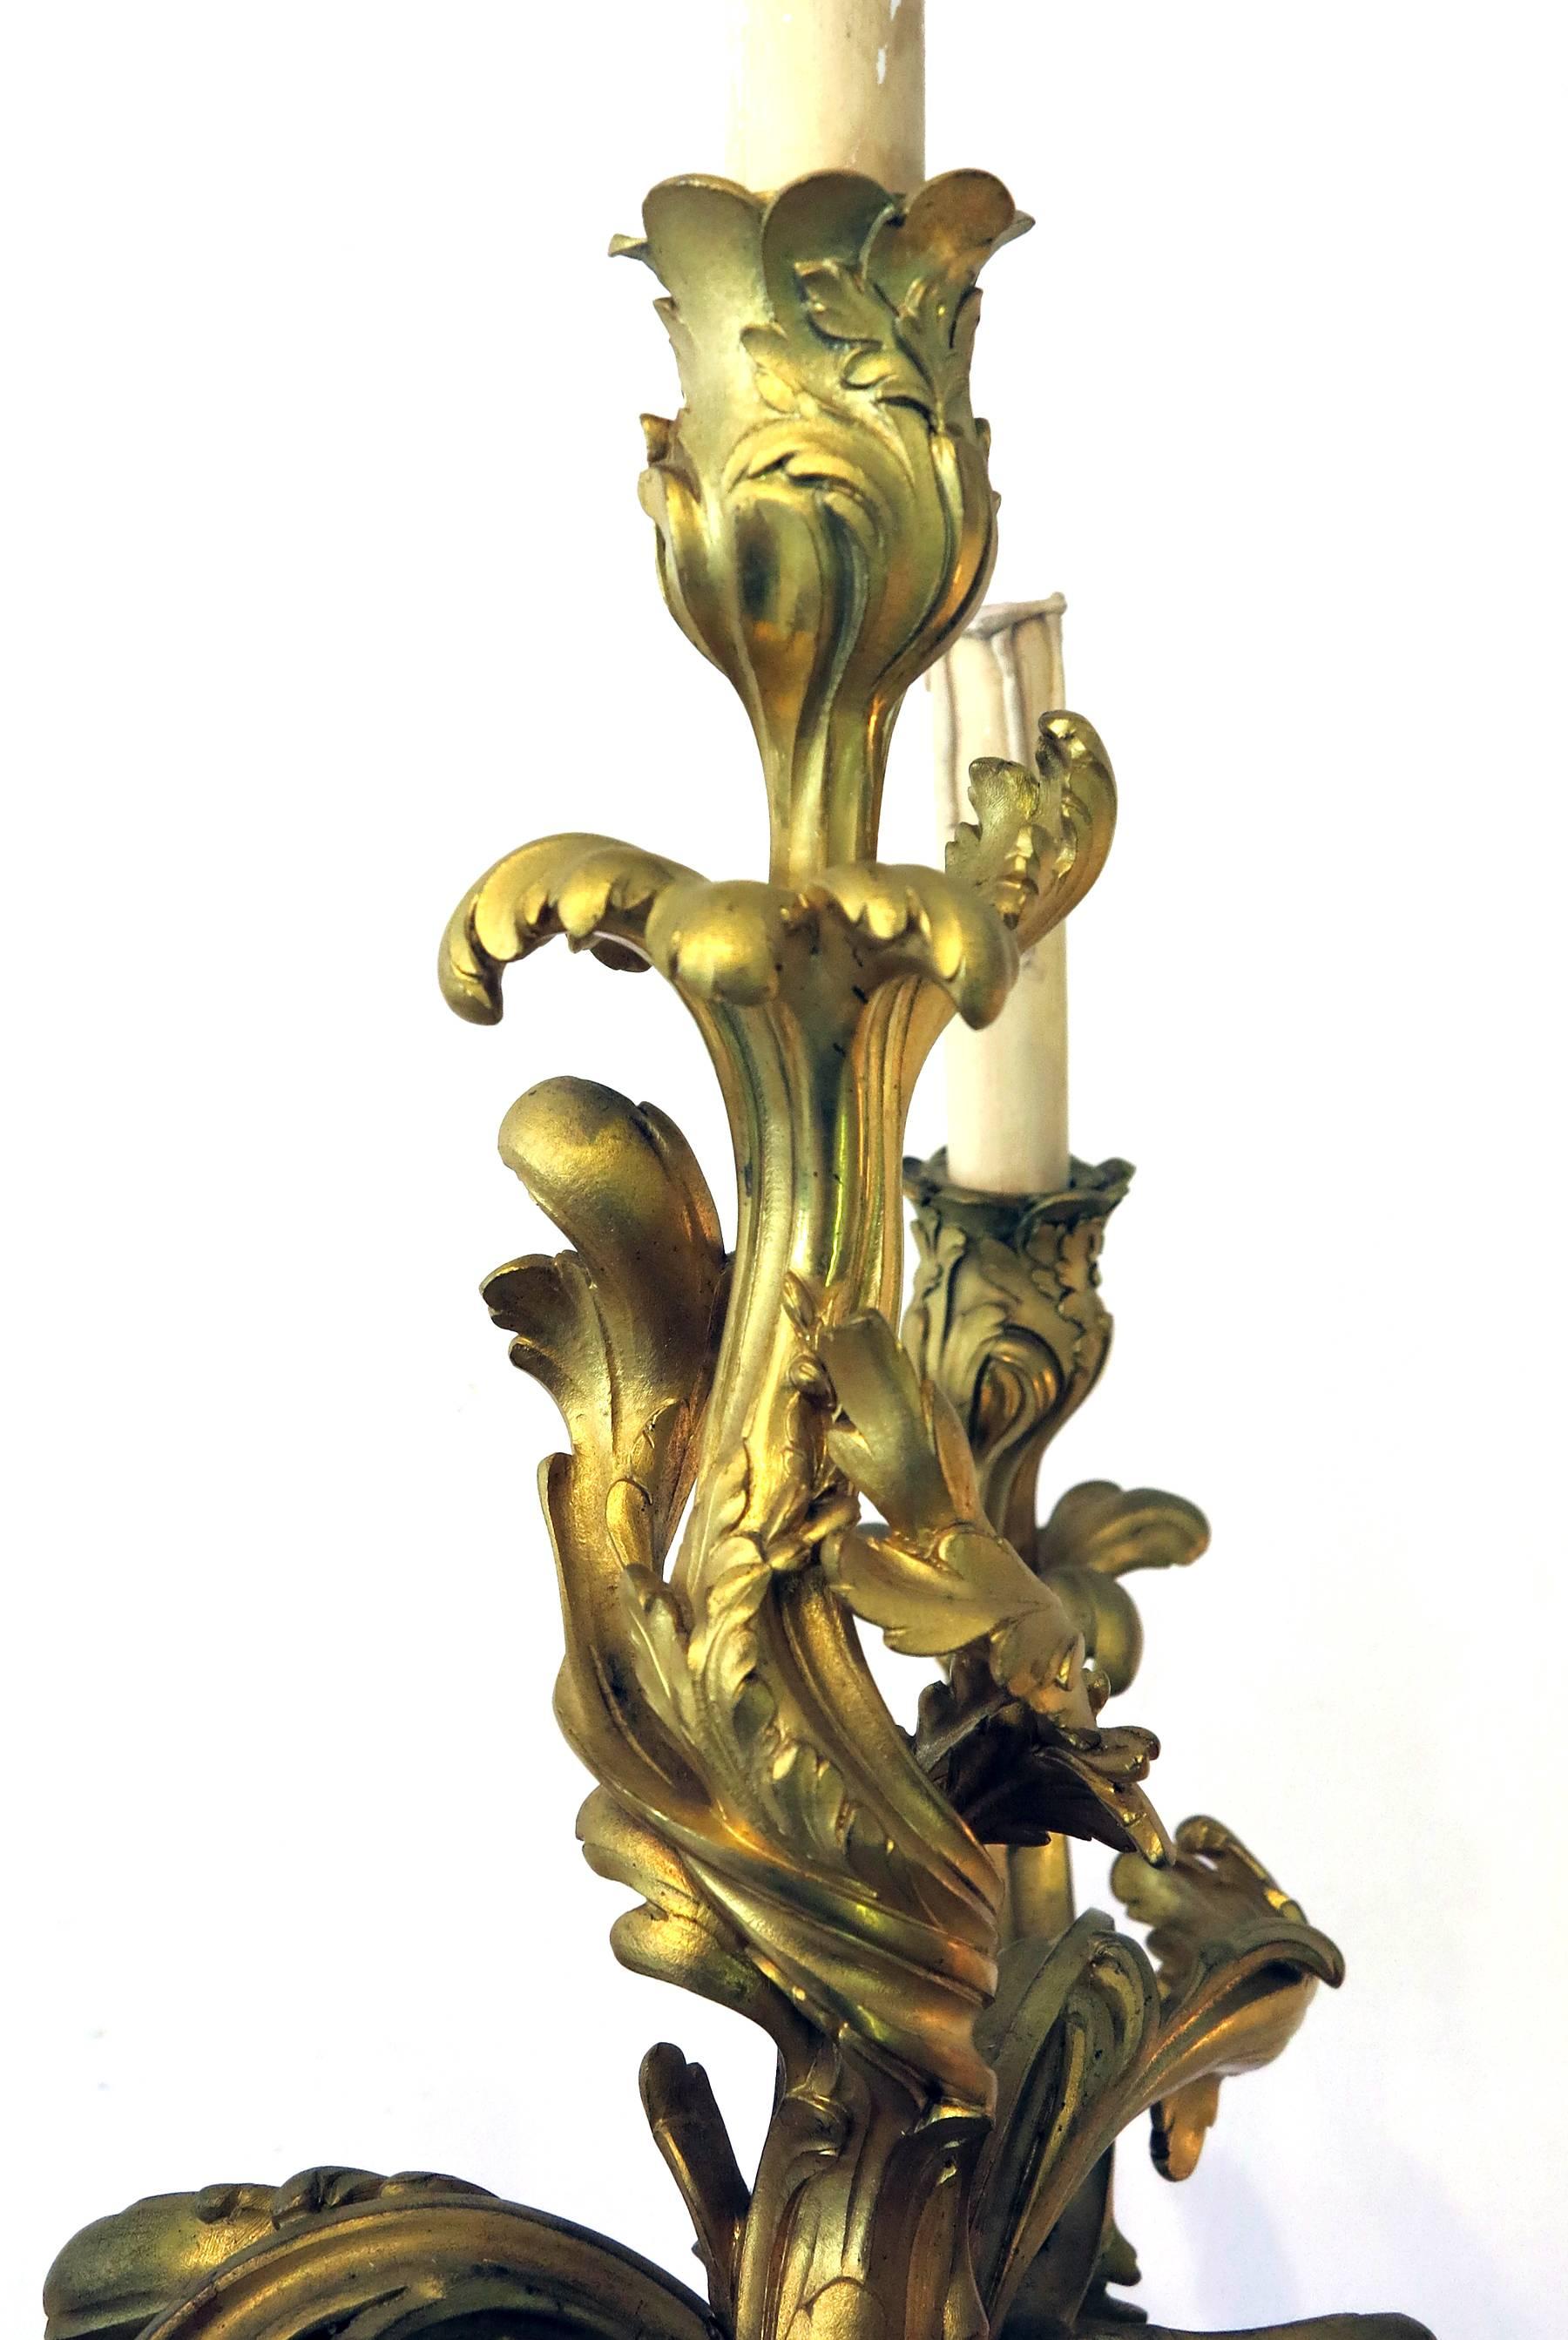 Finely cast bronze pair of candelabra with chased gold doré finish. Sculpted by E Lelievre with foundry mark, French, circa 1880s.